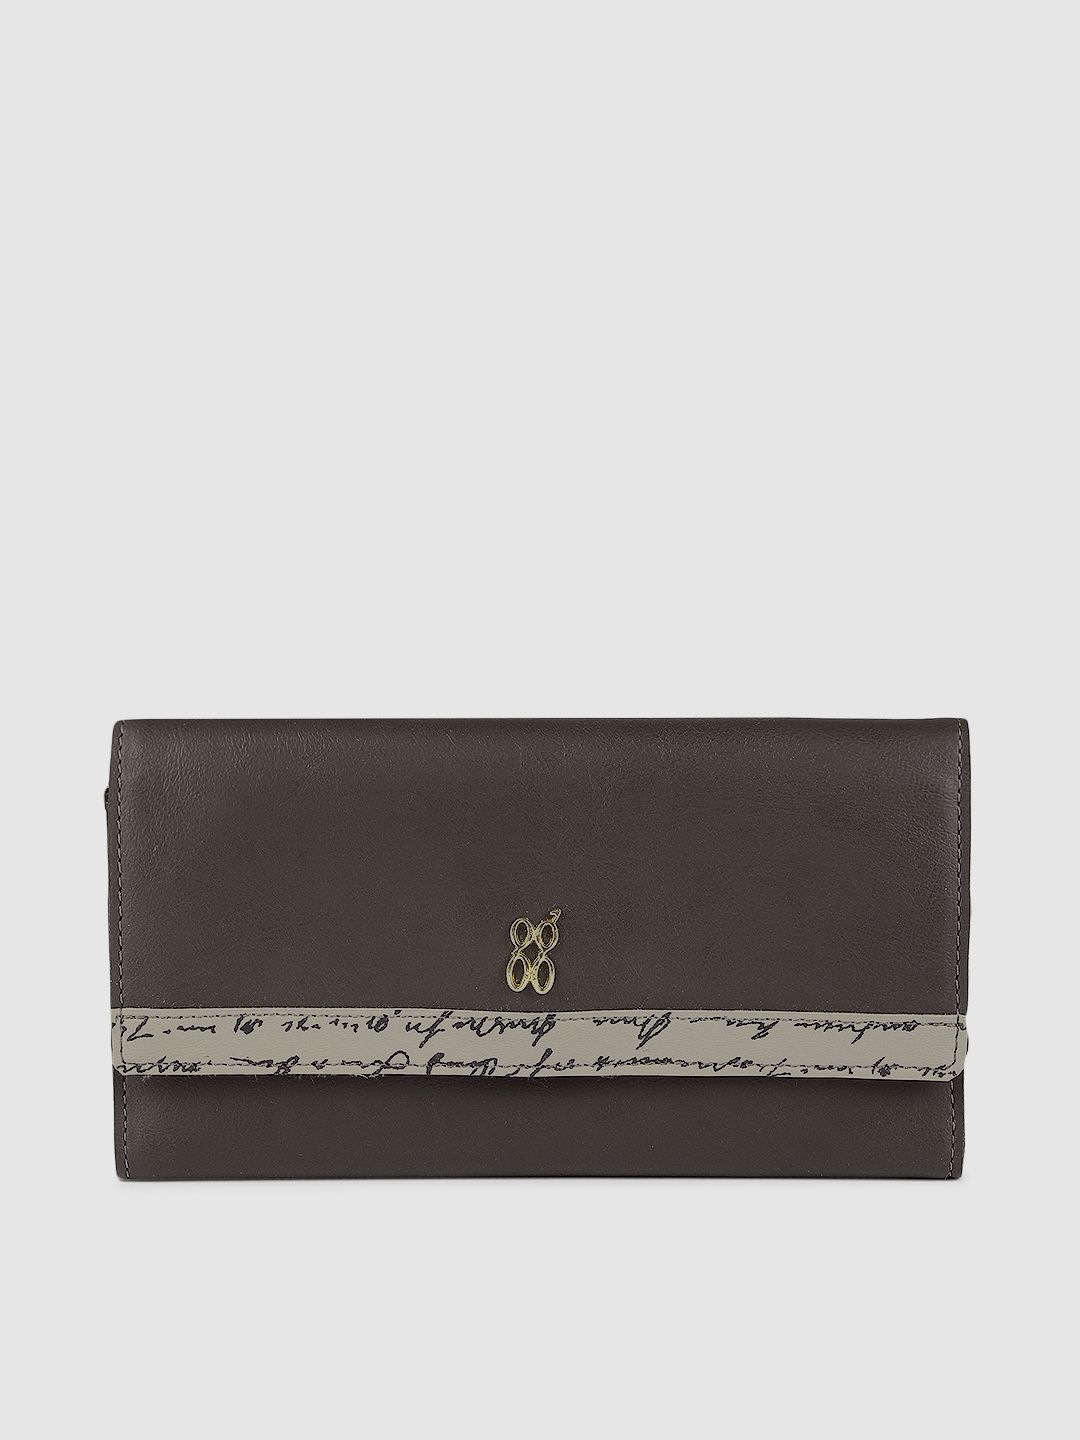 Baggit Women Brown Solid Three Fold Wallet Price in India